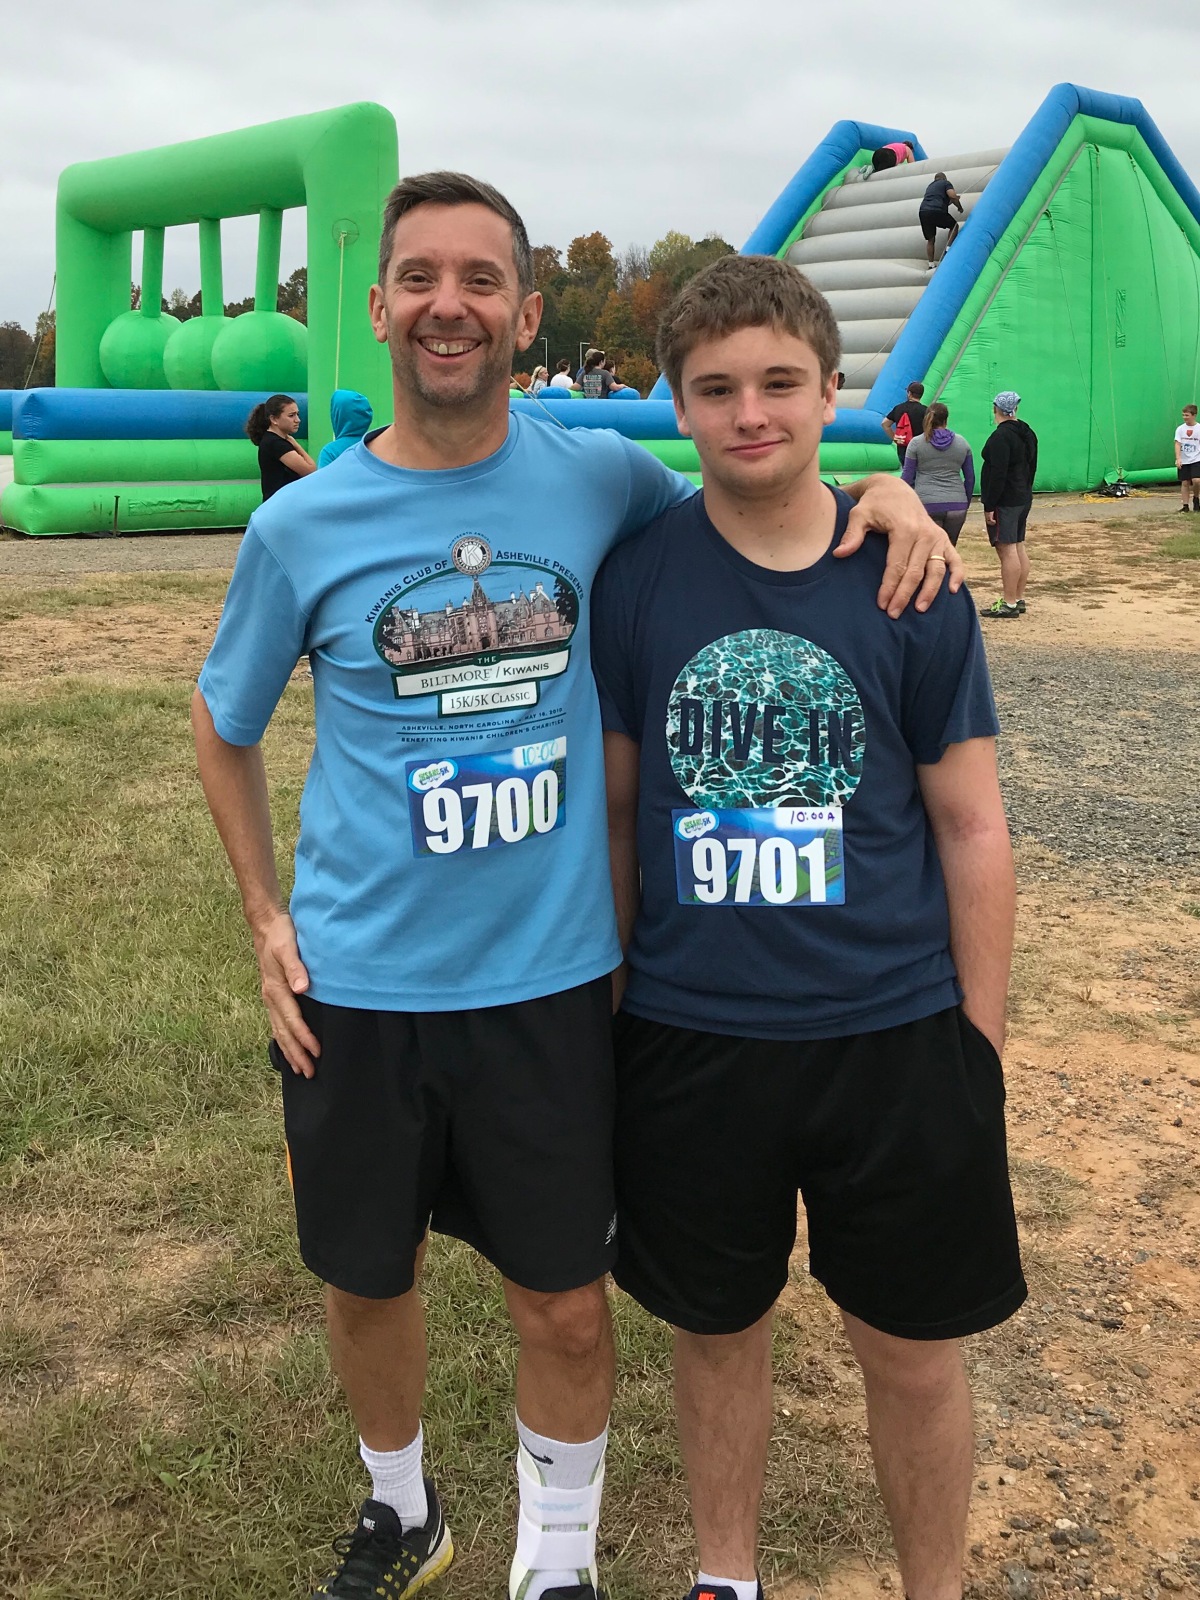 Lessons Learned From The Insane Inflatable 5K